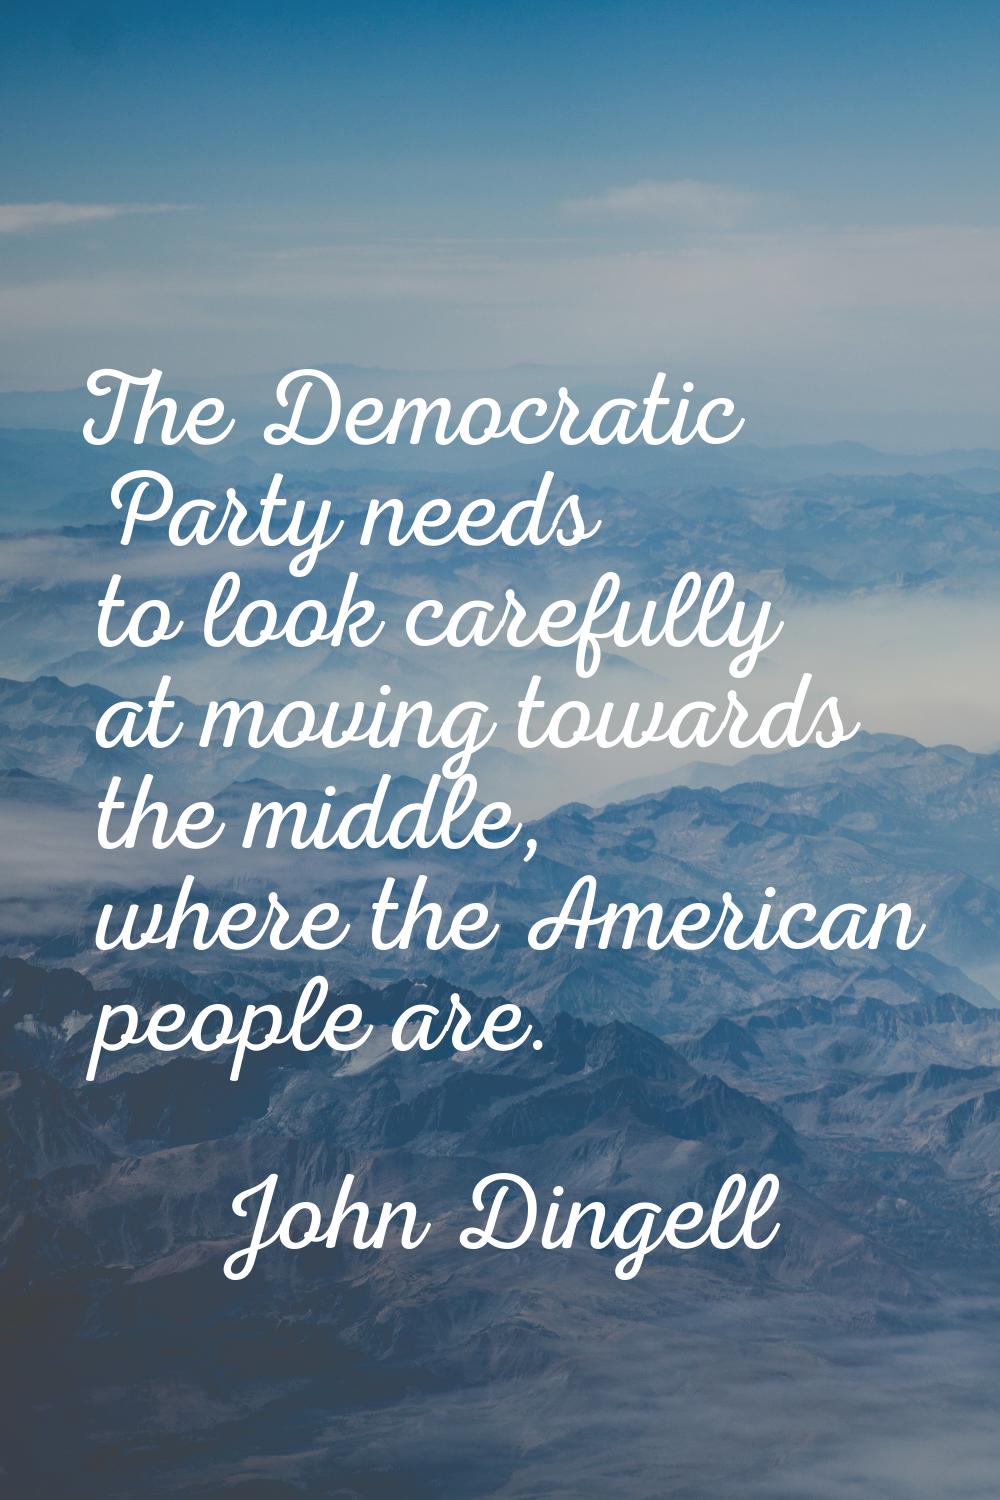 The Democratic Party needs to look carefully at moving towards the middle, where the American peopl